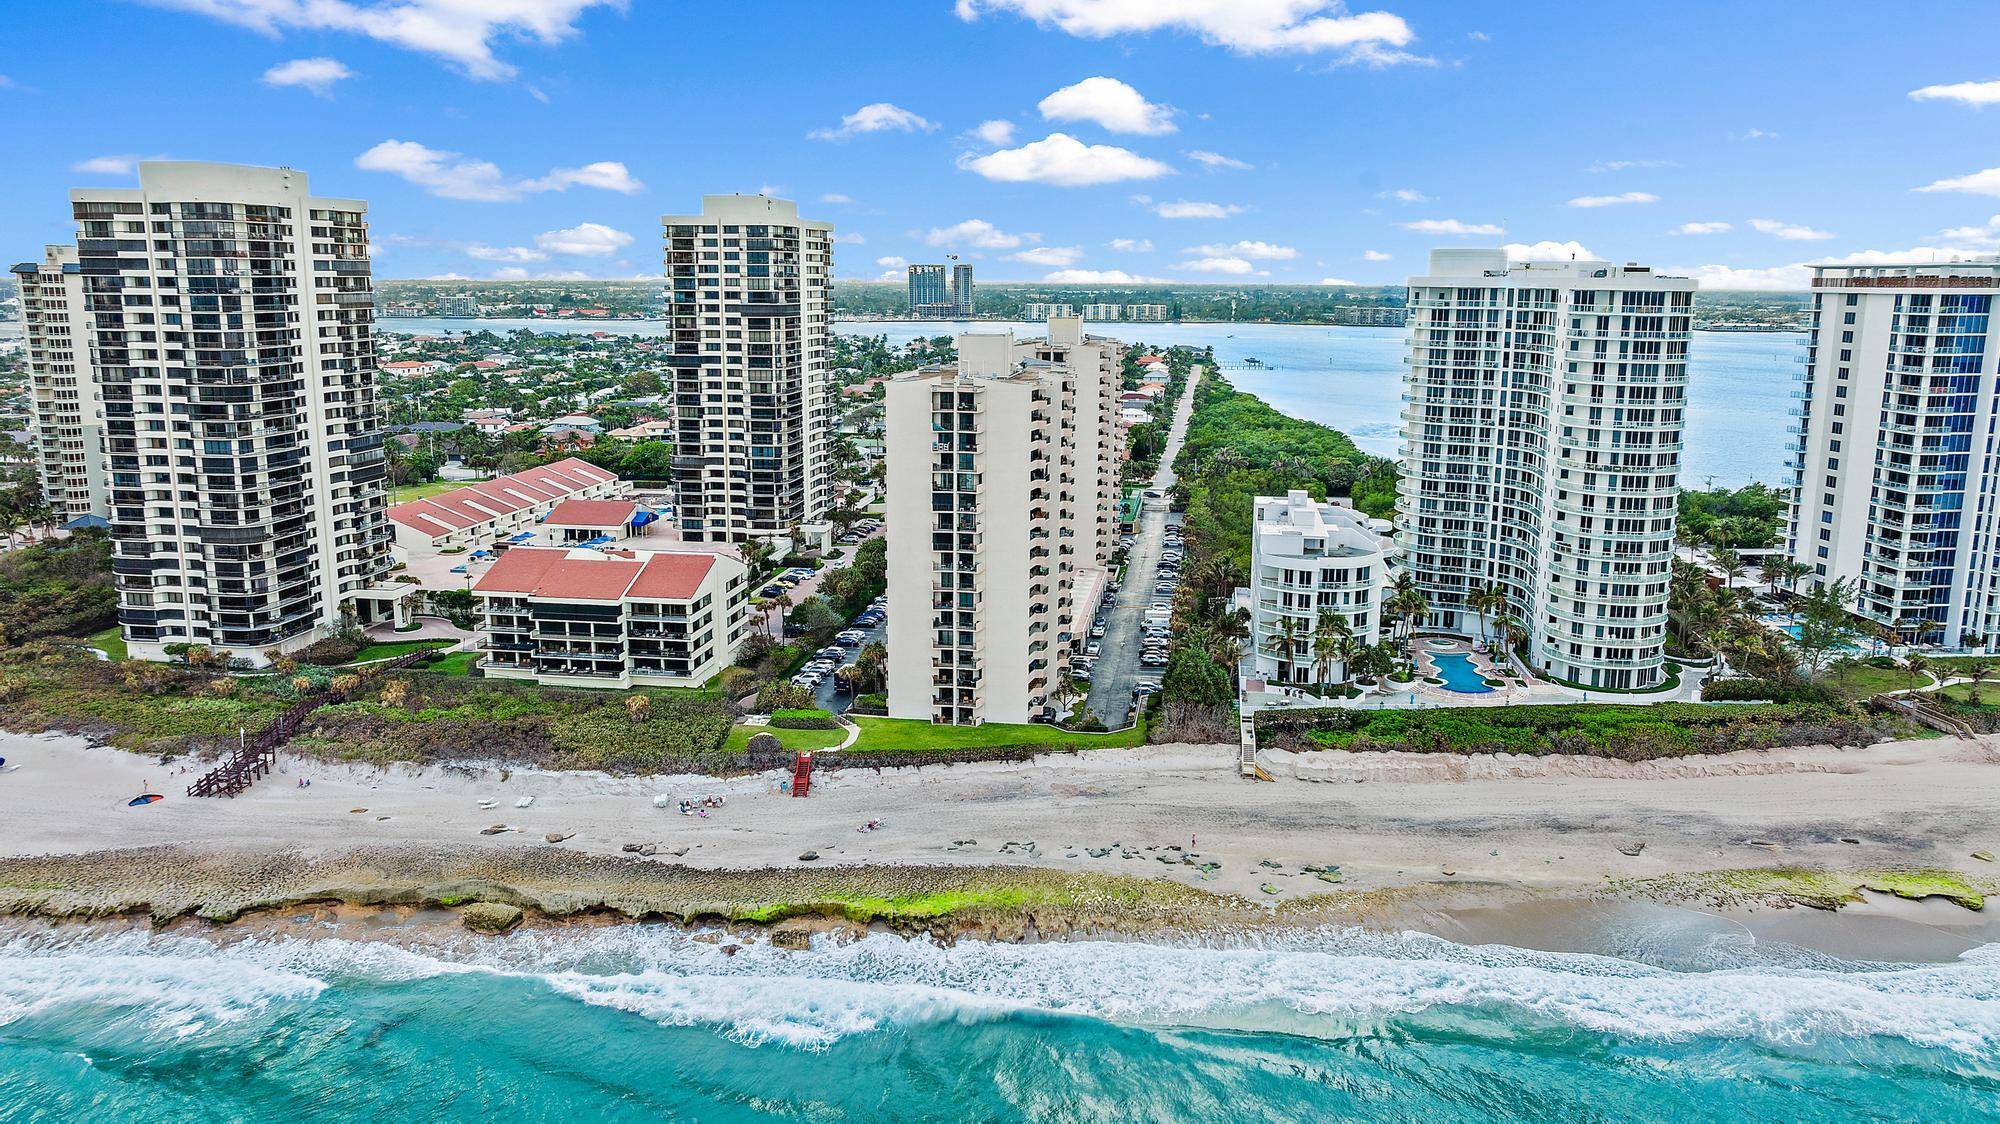 New A C ! Stunning Turn Key Furnished Condo with magnificents views from the Intercoastal and Ocean front, All Updated bathrooms and Kitchen with beautifull porcelain tile floors, Washer Dryer, ...